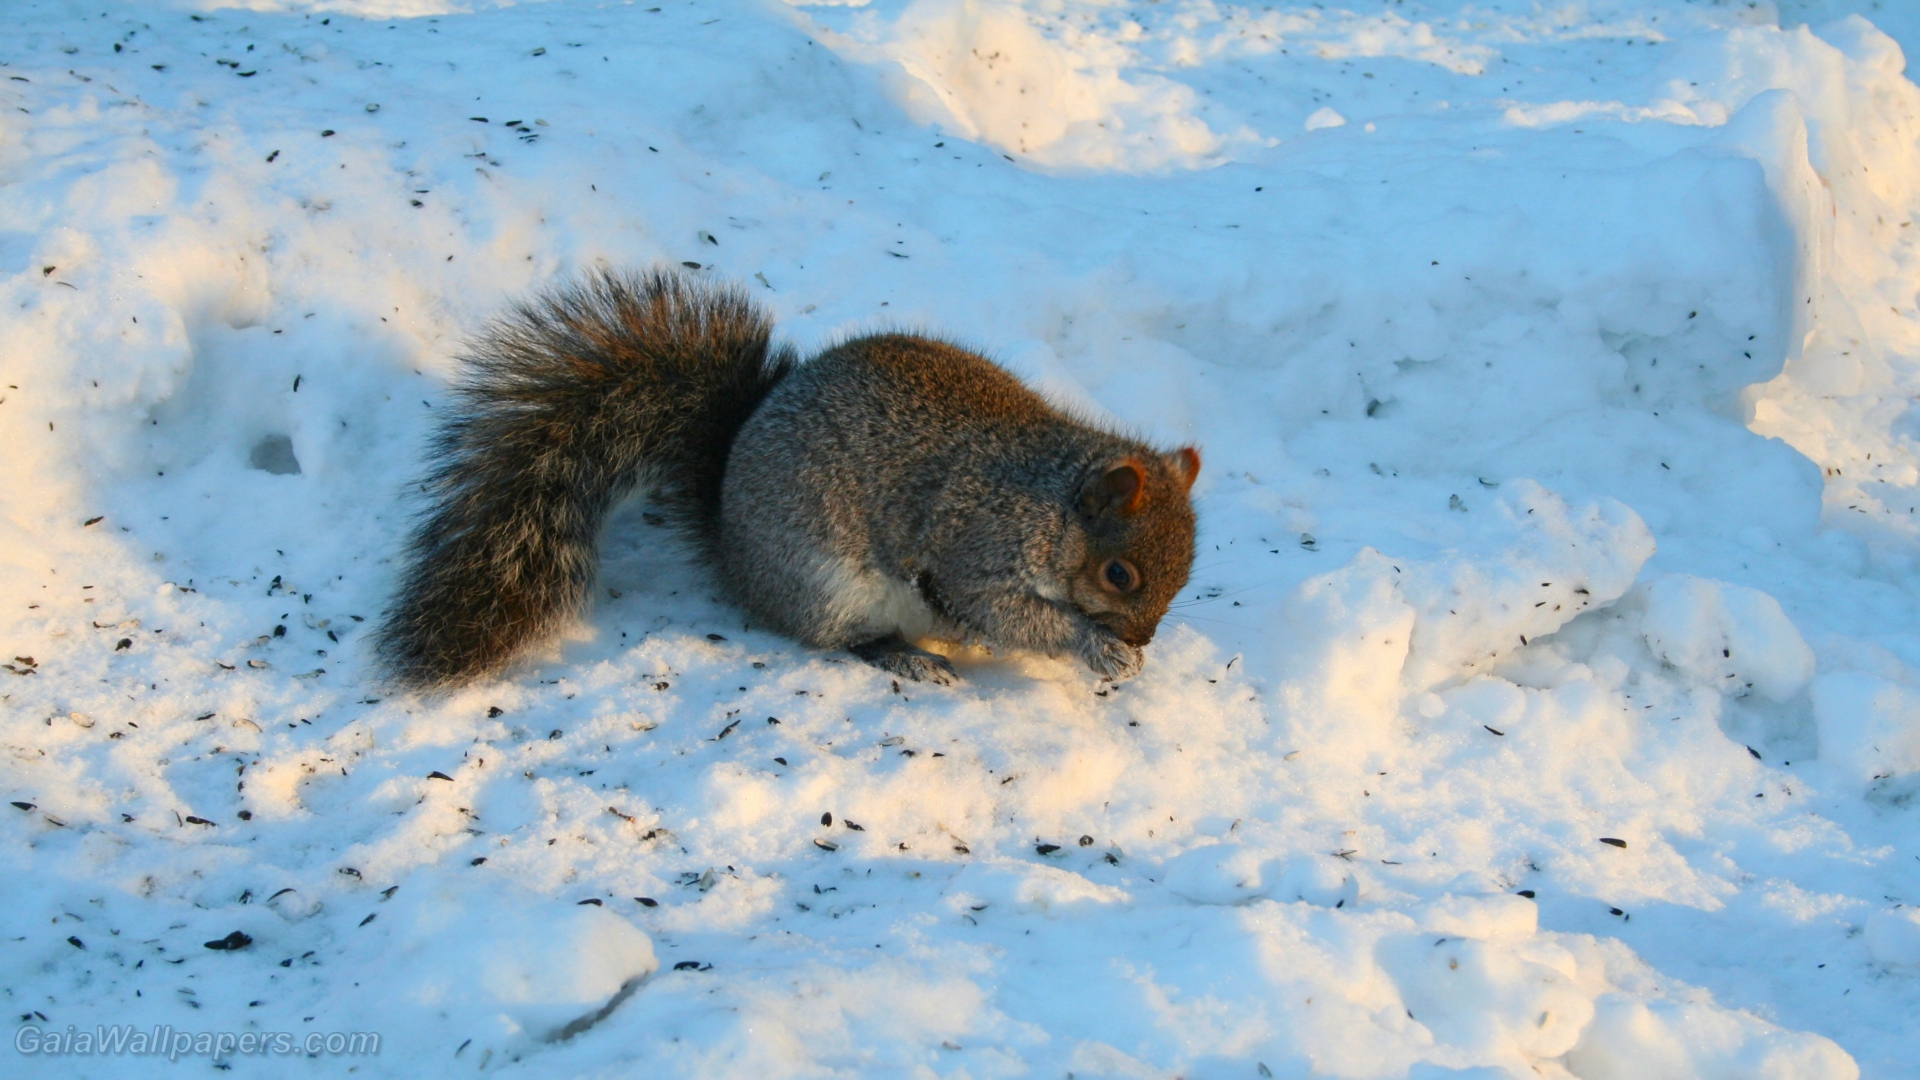 Squirrel eating on the snow - Free desktop wallpapers